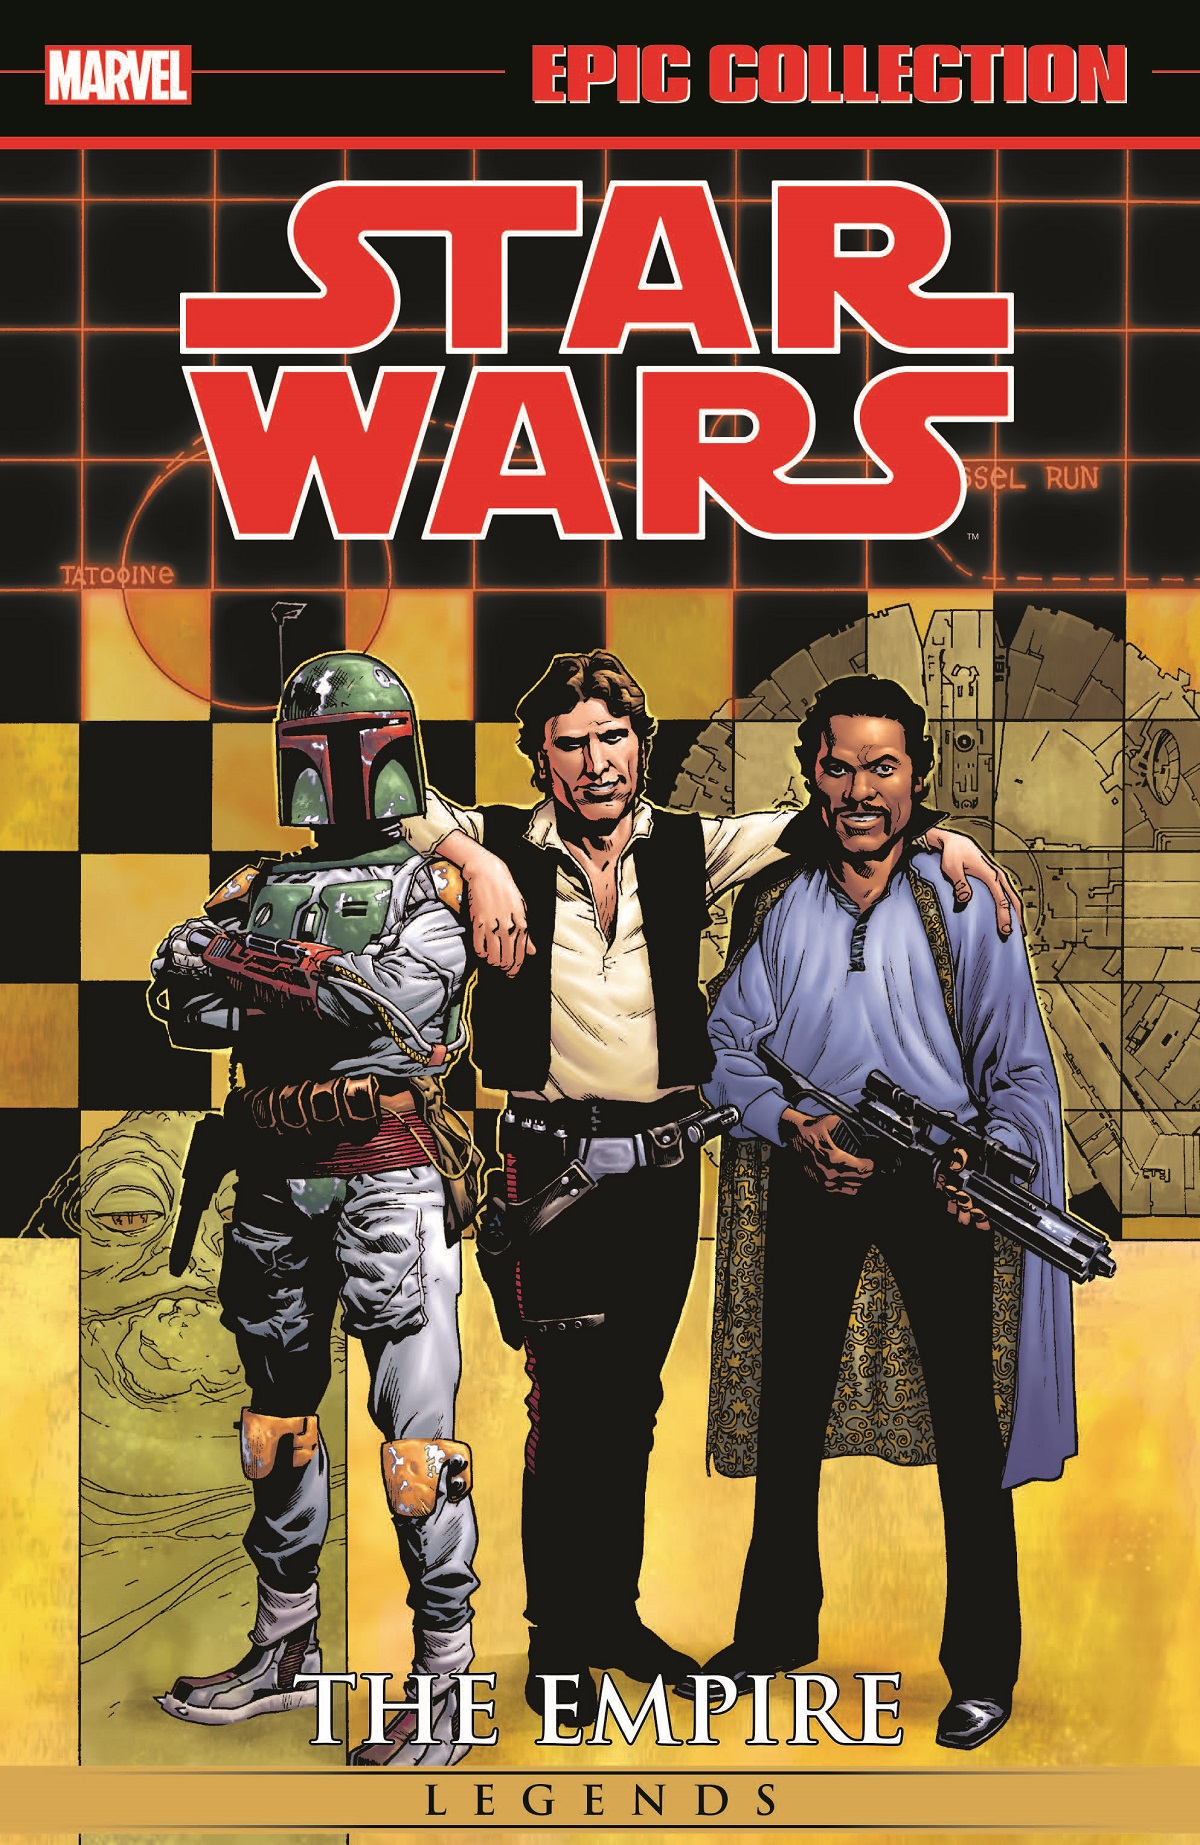 Star Wars Legends Epic Collection: The Empire Vol. 7 (Trade Paperback)